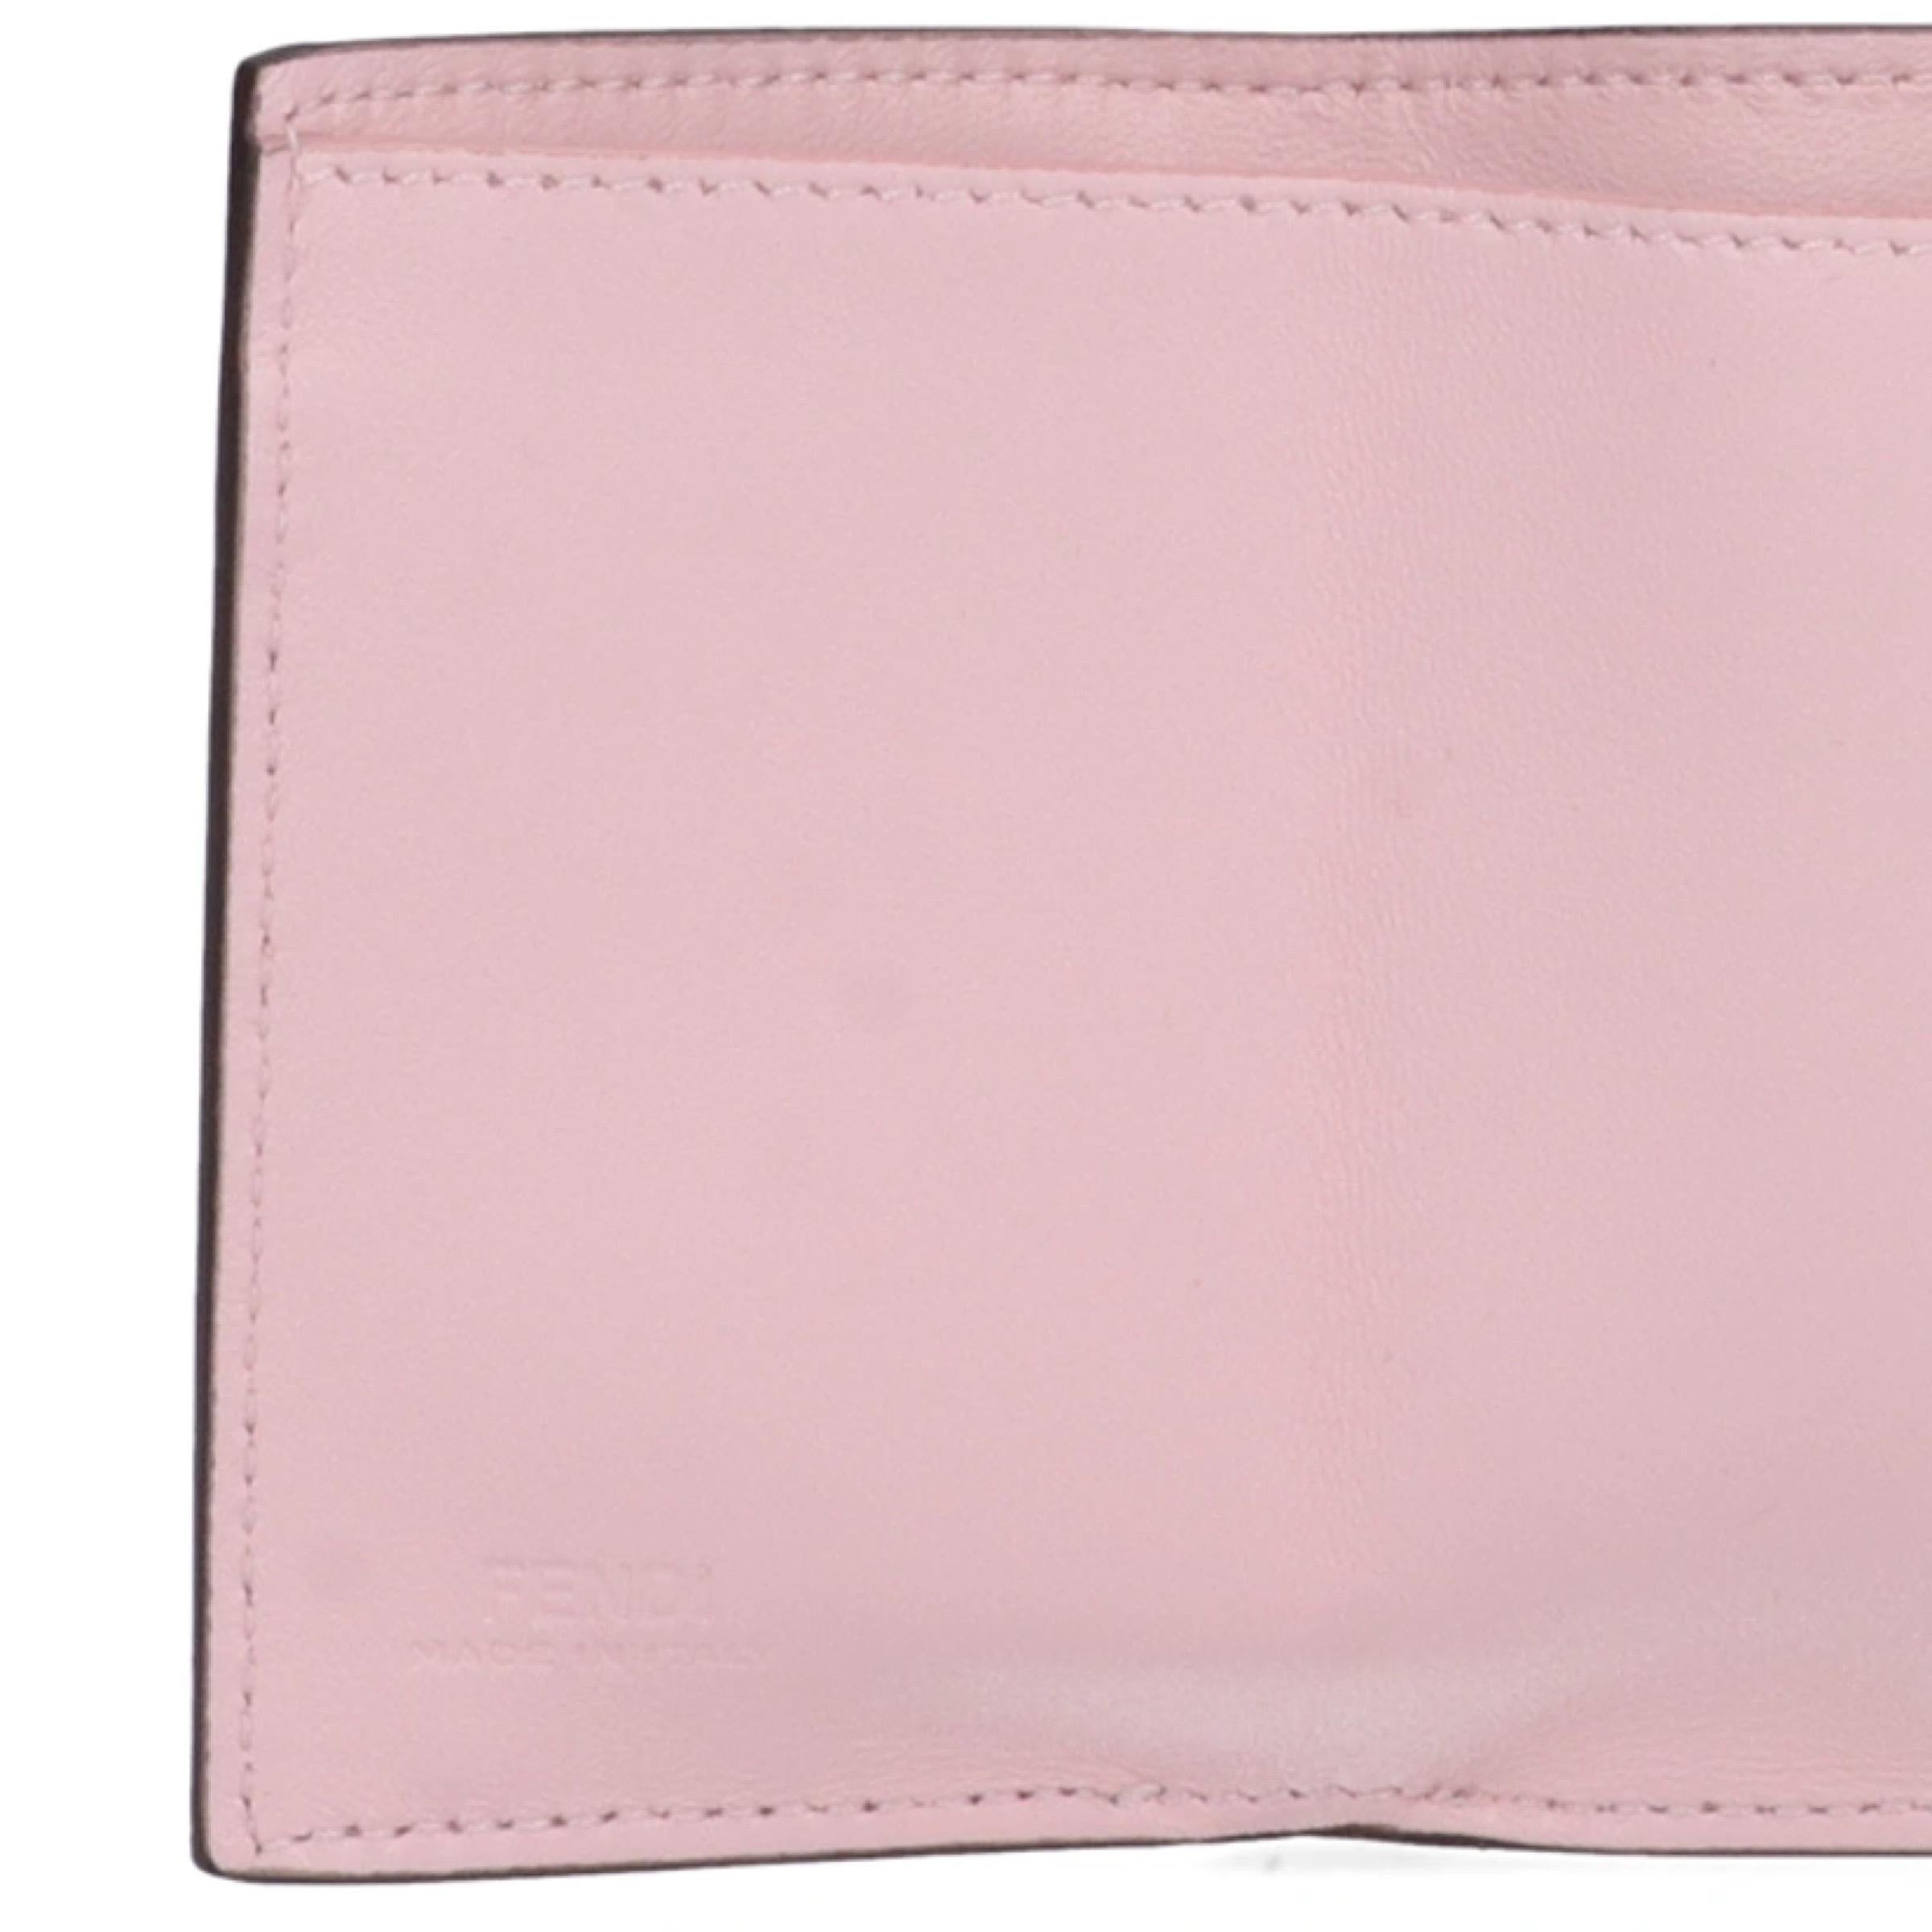 NEW Fendi Candy Pink Baguette Micro FF Monogram Leather Trifold Wallet For Sale 4